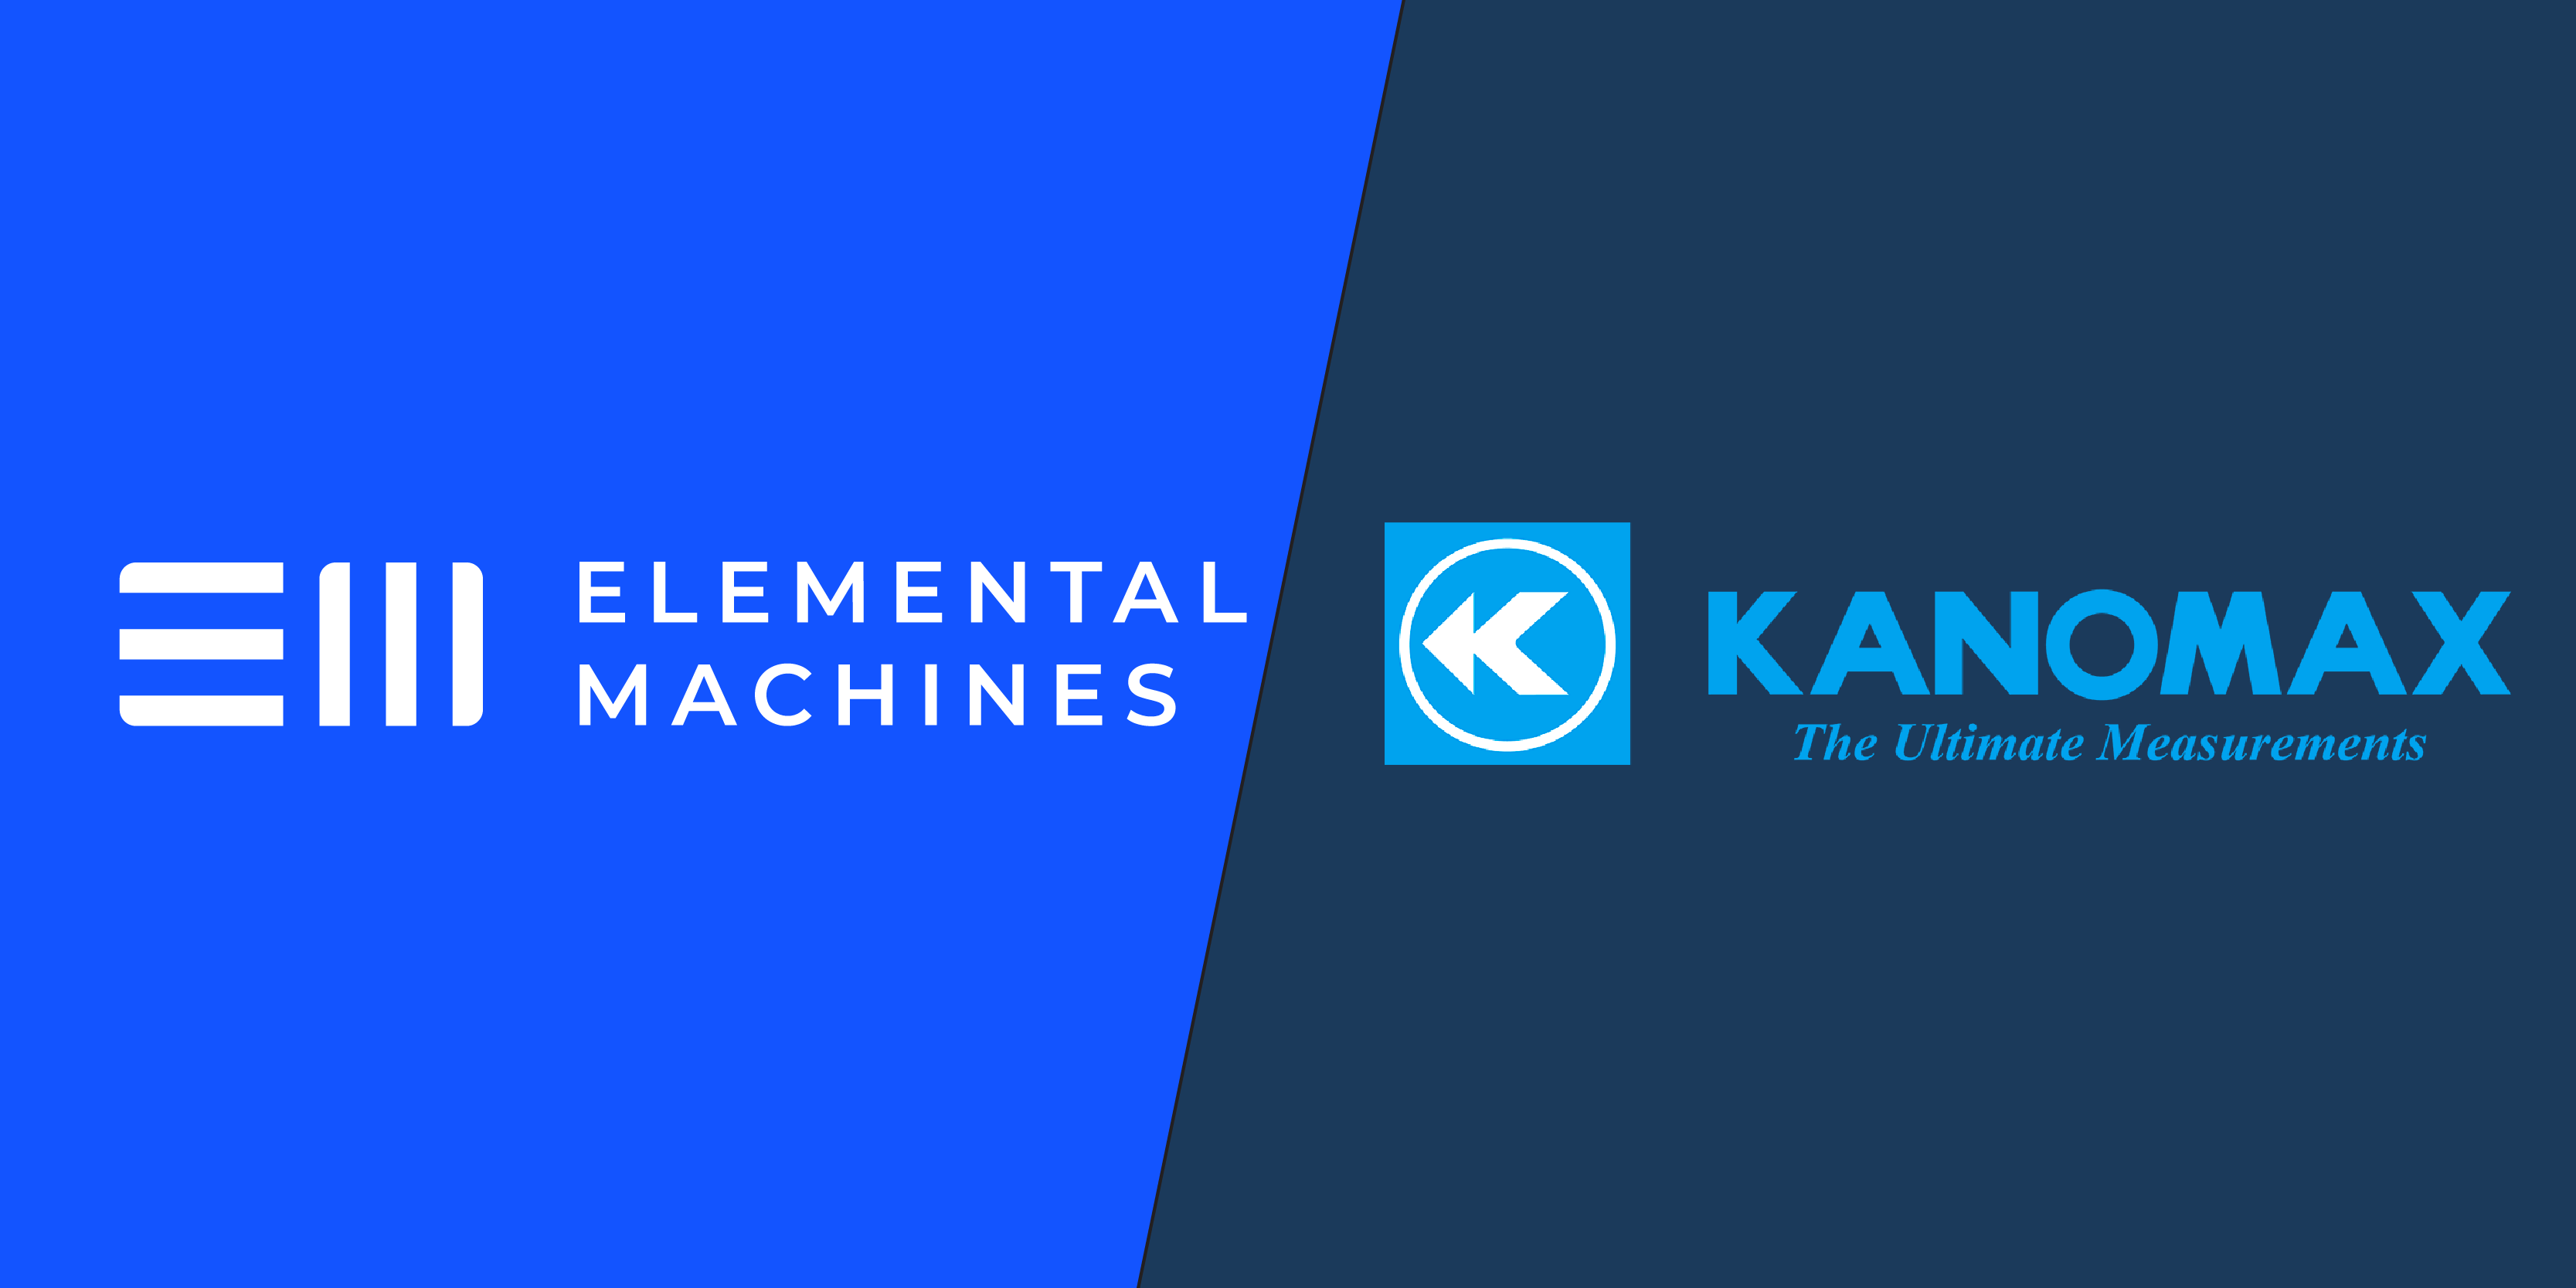 Elemental Machines & Kanomax USA partner to offer an integrated digital solution